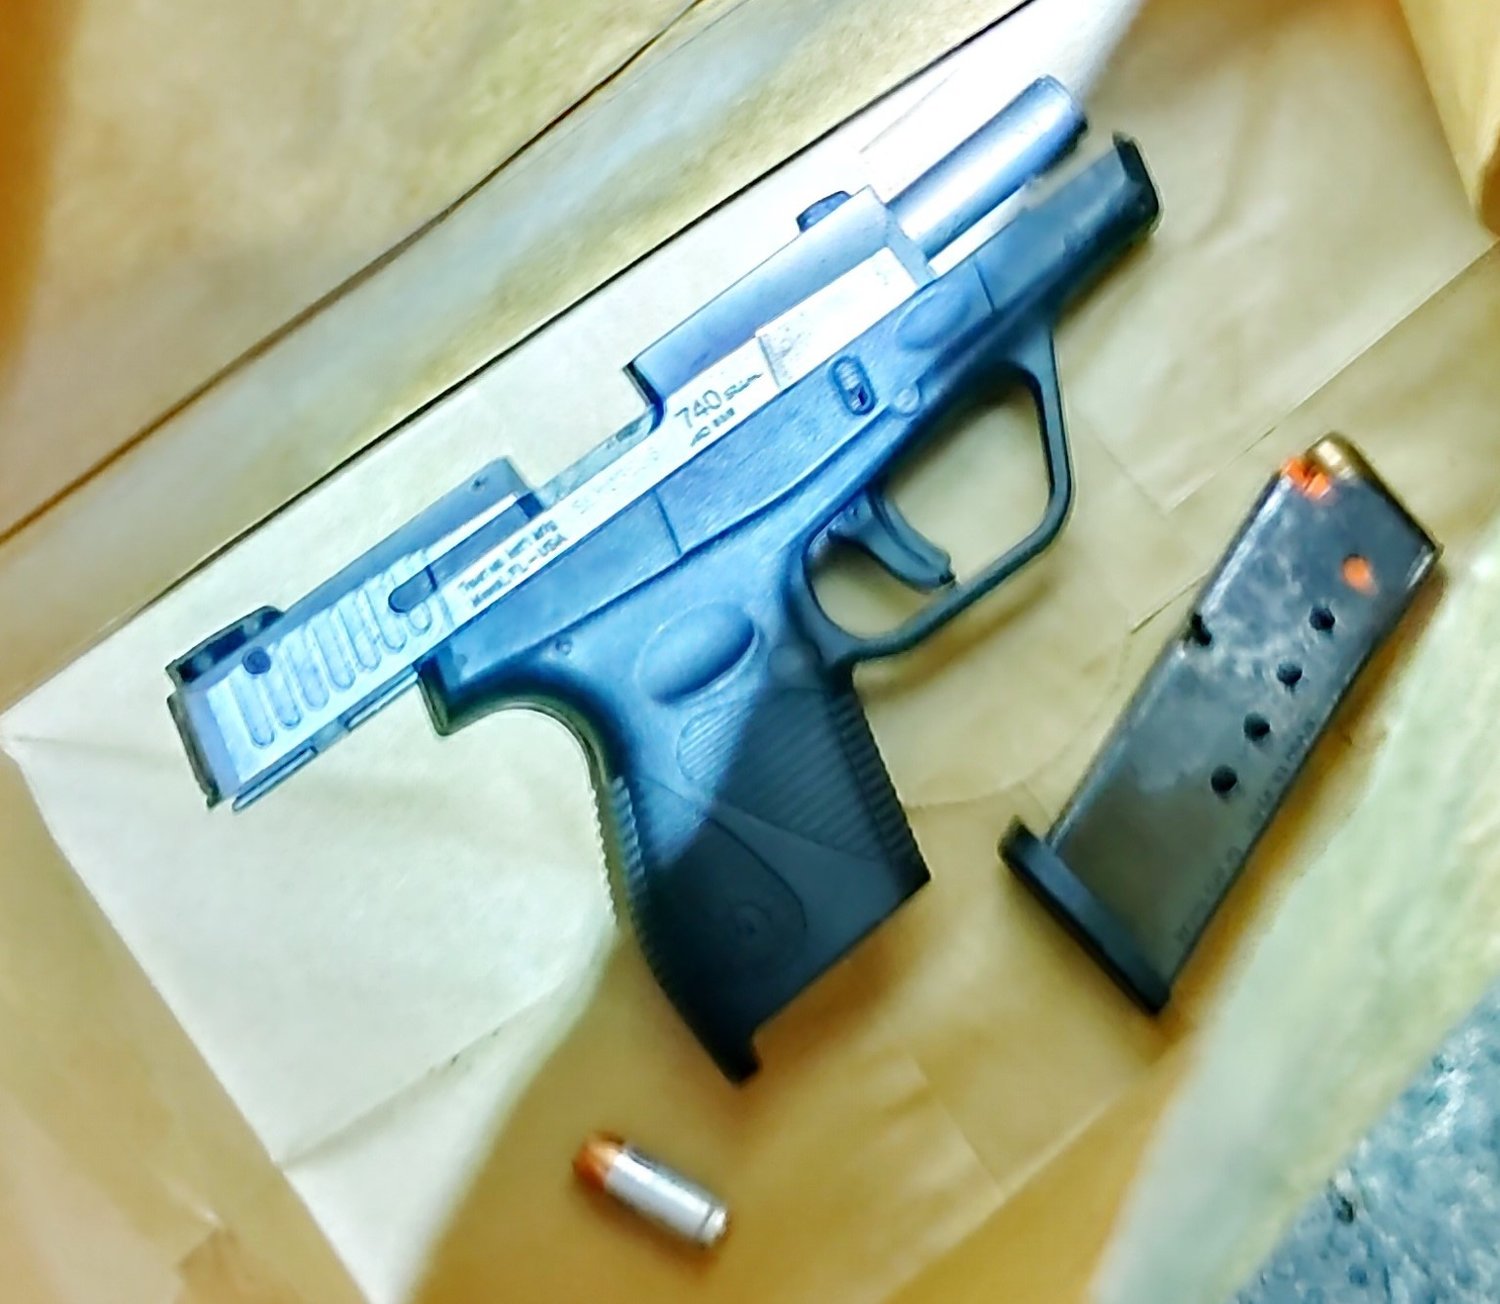 City of Newburgh Police recovered this firearm Friday night in the vicinity of Bridge Street.